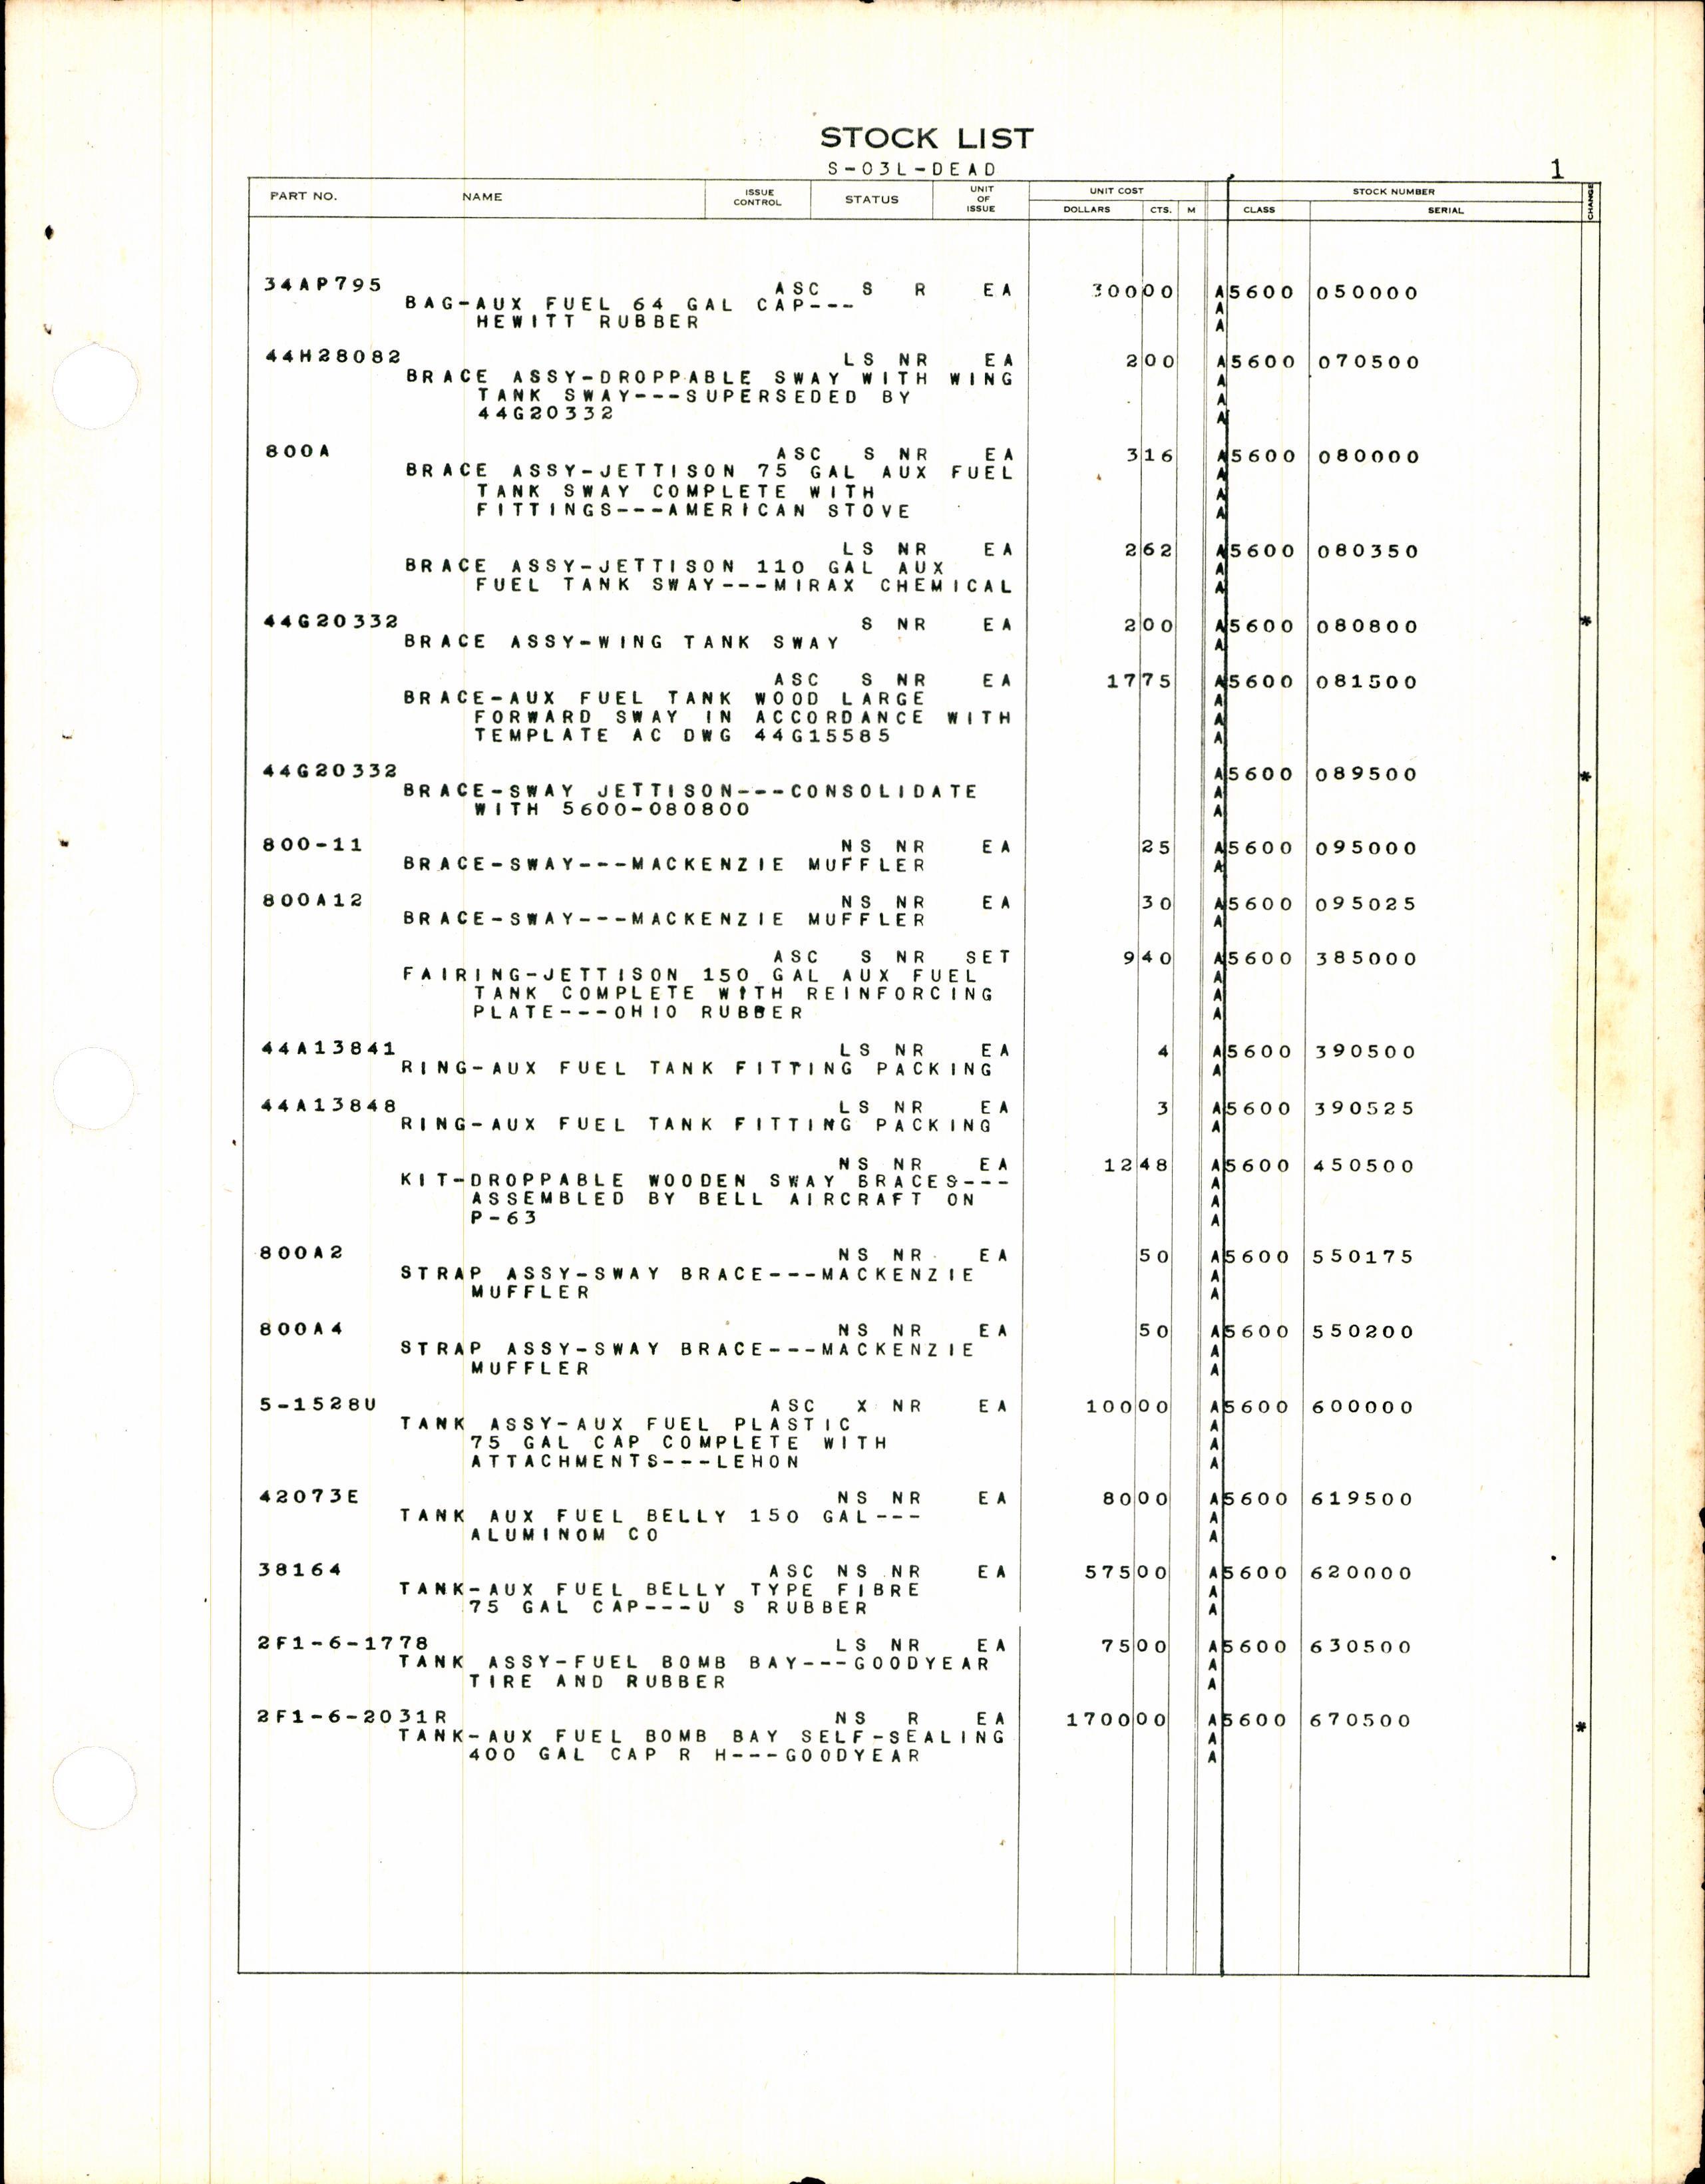 Sample page 9 from AirCorps Library document: Dead Items Stock List for Aircraft Auxiliary Fuel Tanks